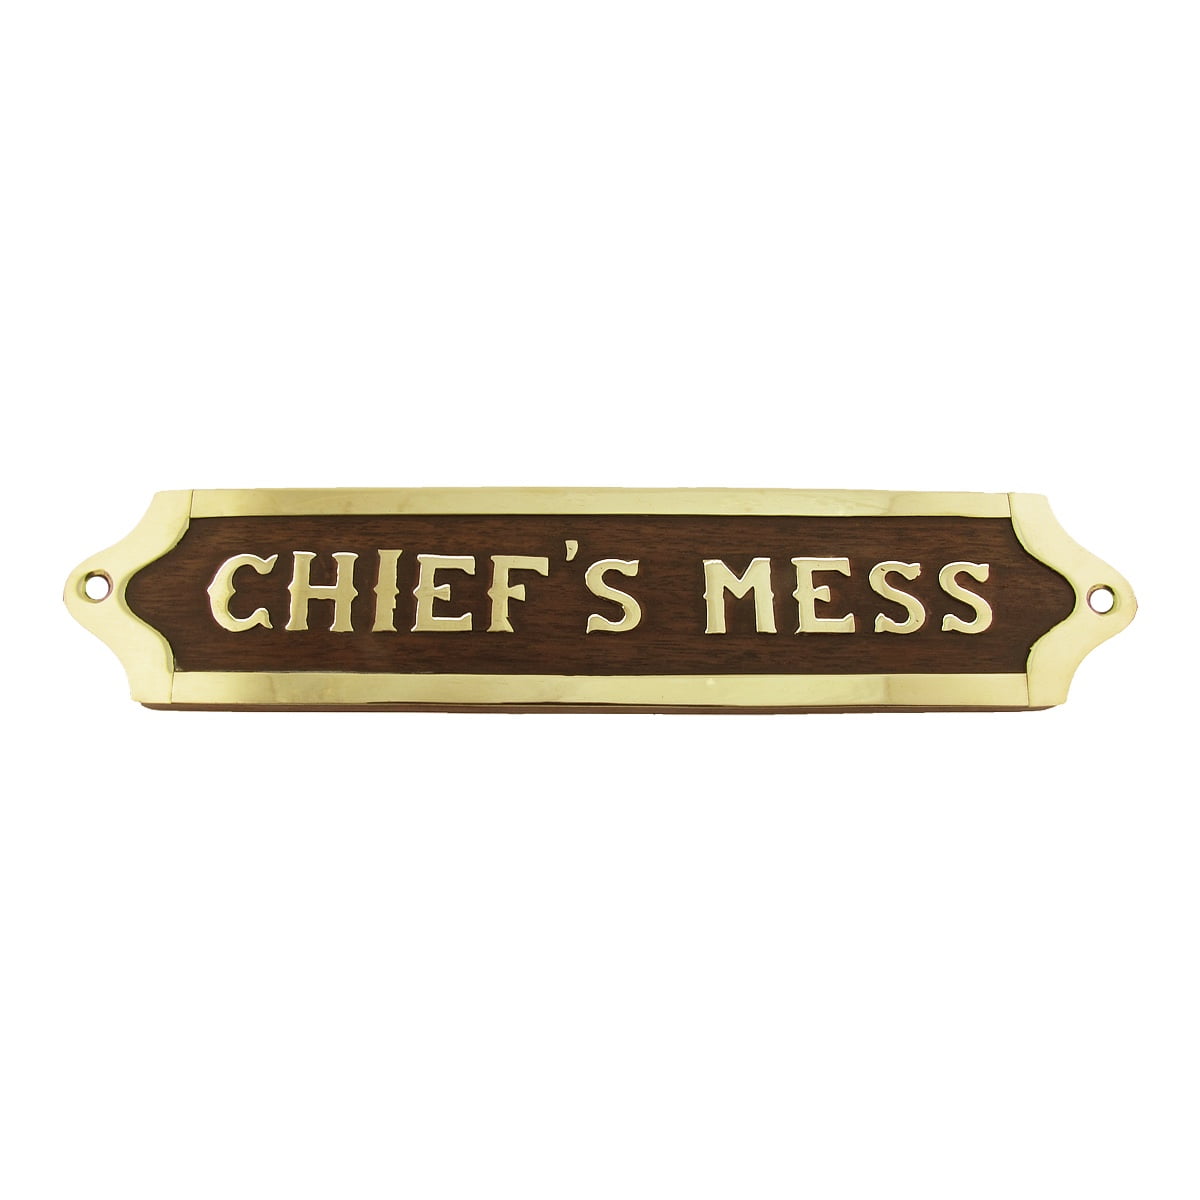 Chiefs Mess Brass Door Sign Maritime Ships Plaque Ship Wall Decor US Navy Gift for sale online